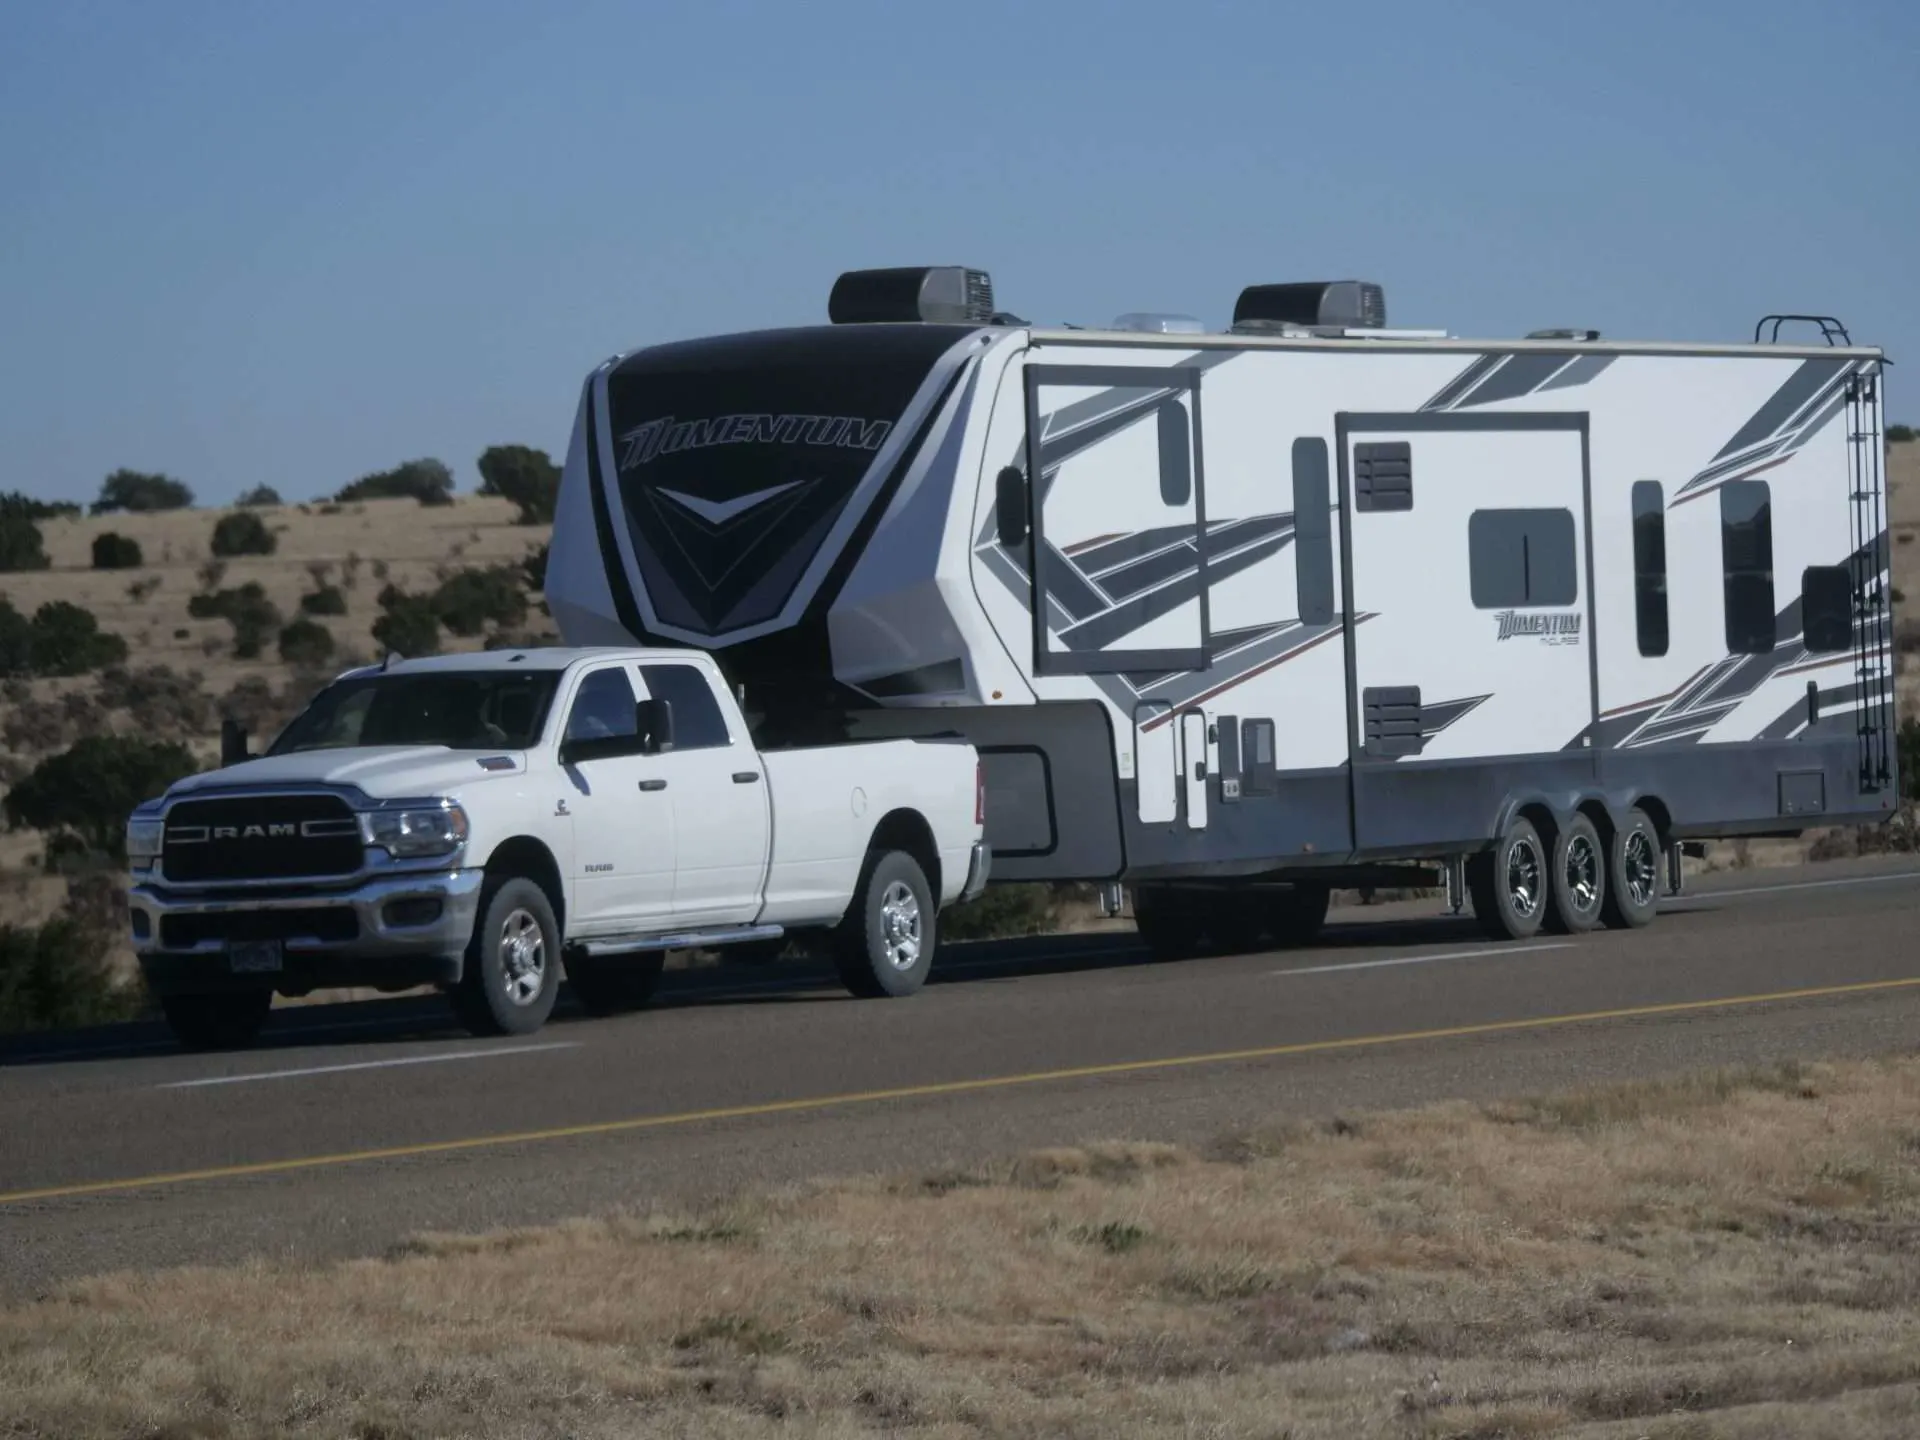 White RAM truck towing fifth wheel